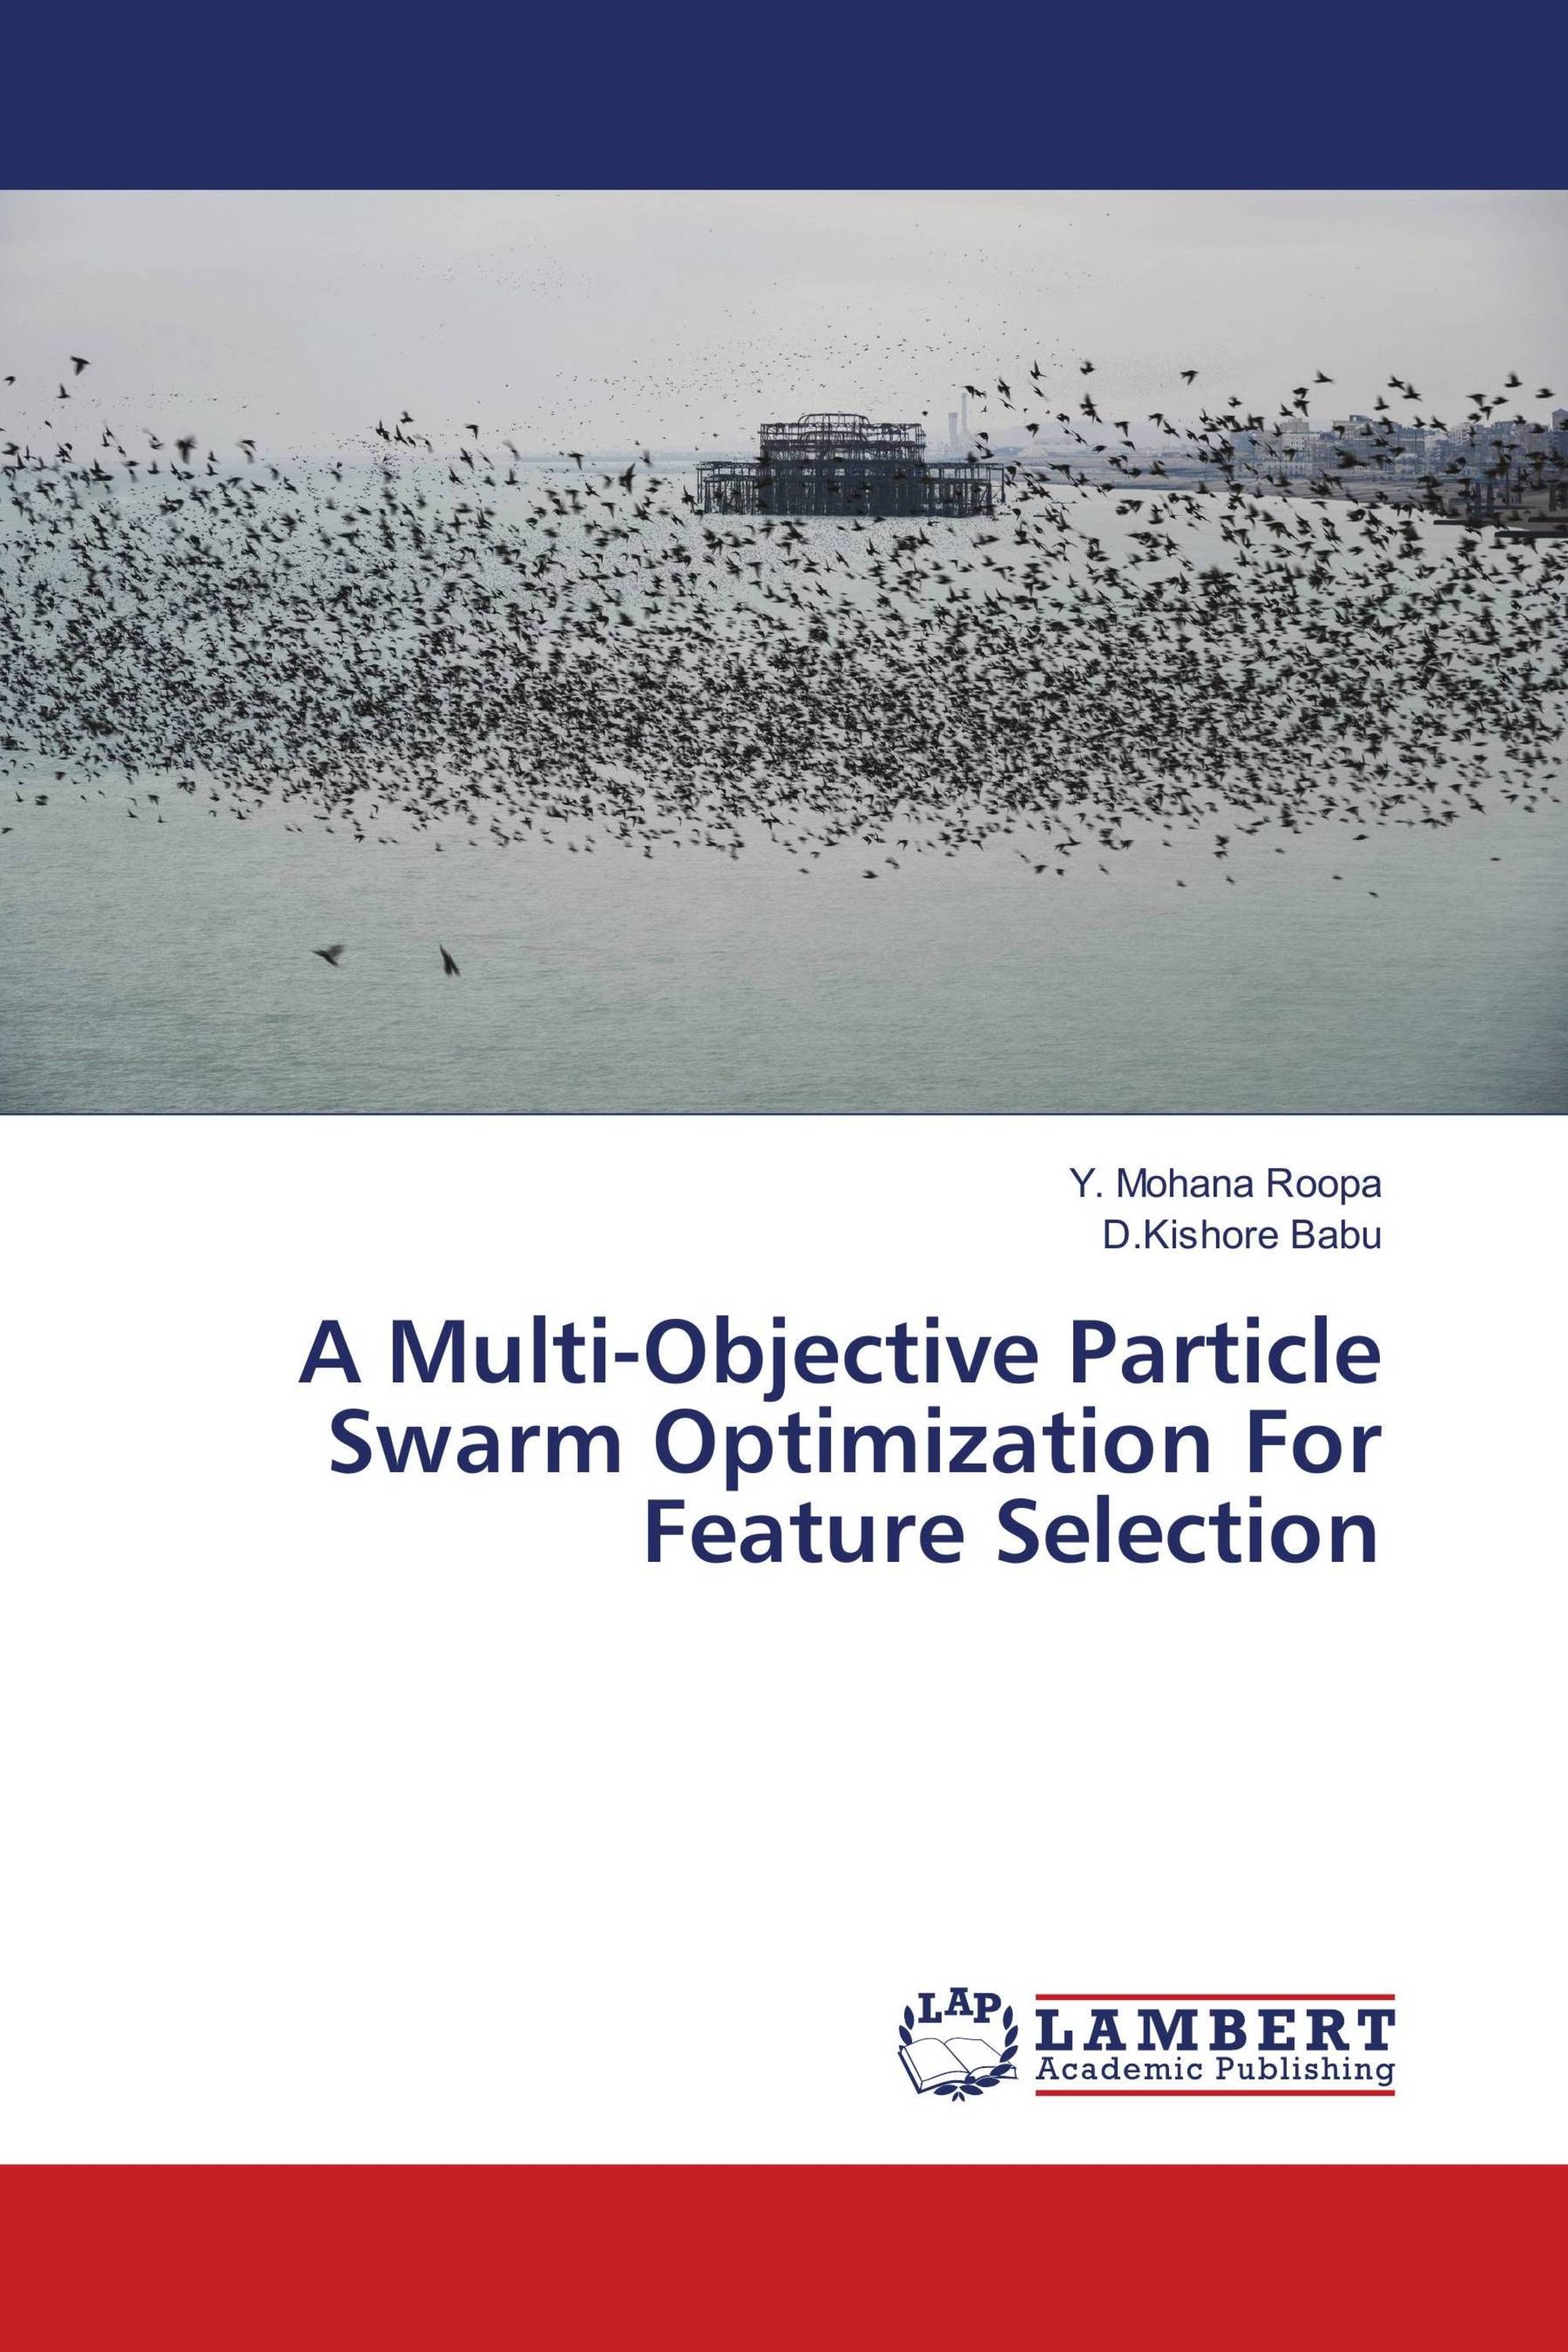 A Multi Objective Particle Swarm Optimization for Feature Selection